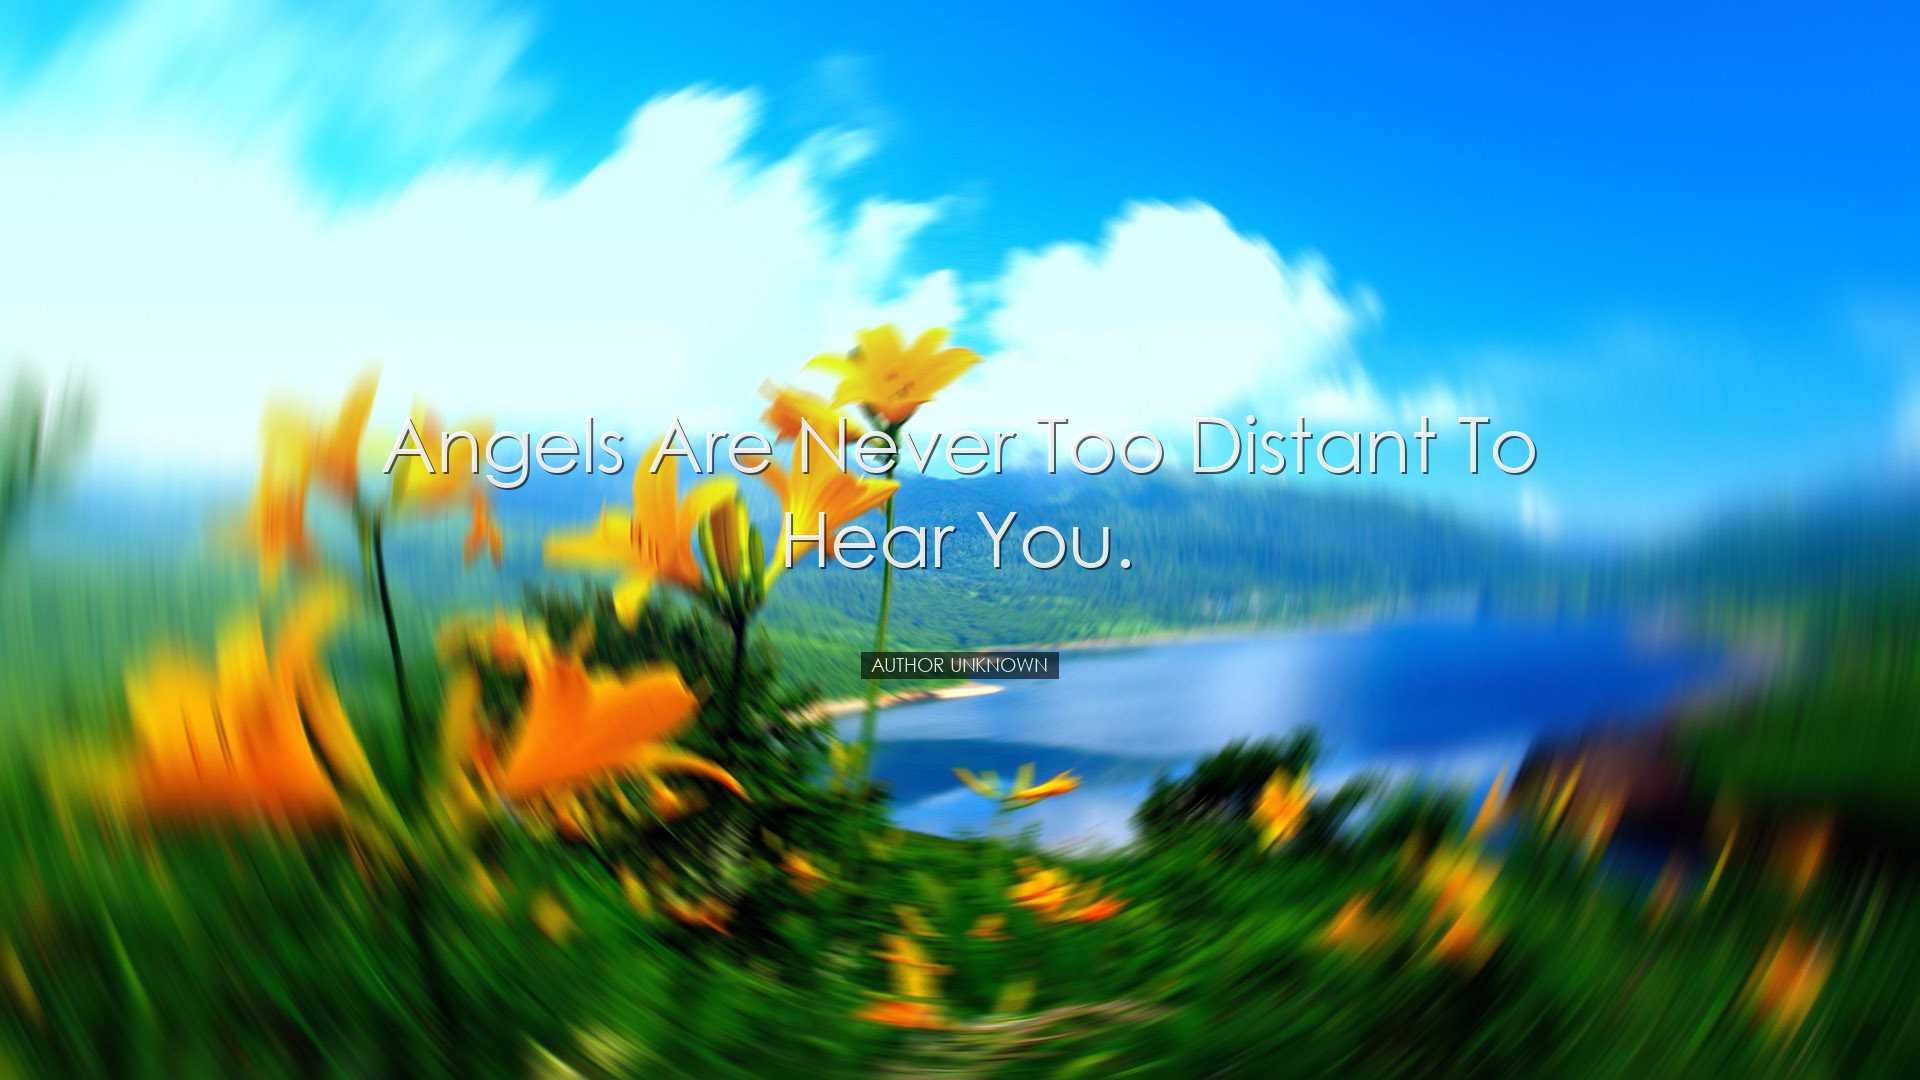 Angels are never too distant to hear you. - Author Unknown